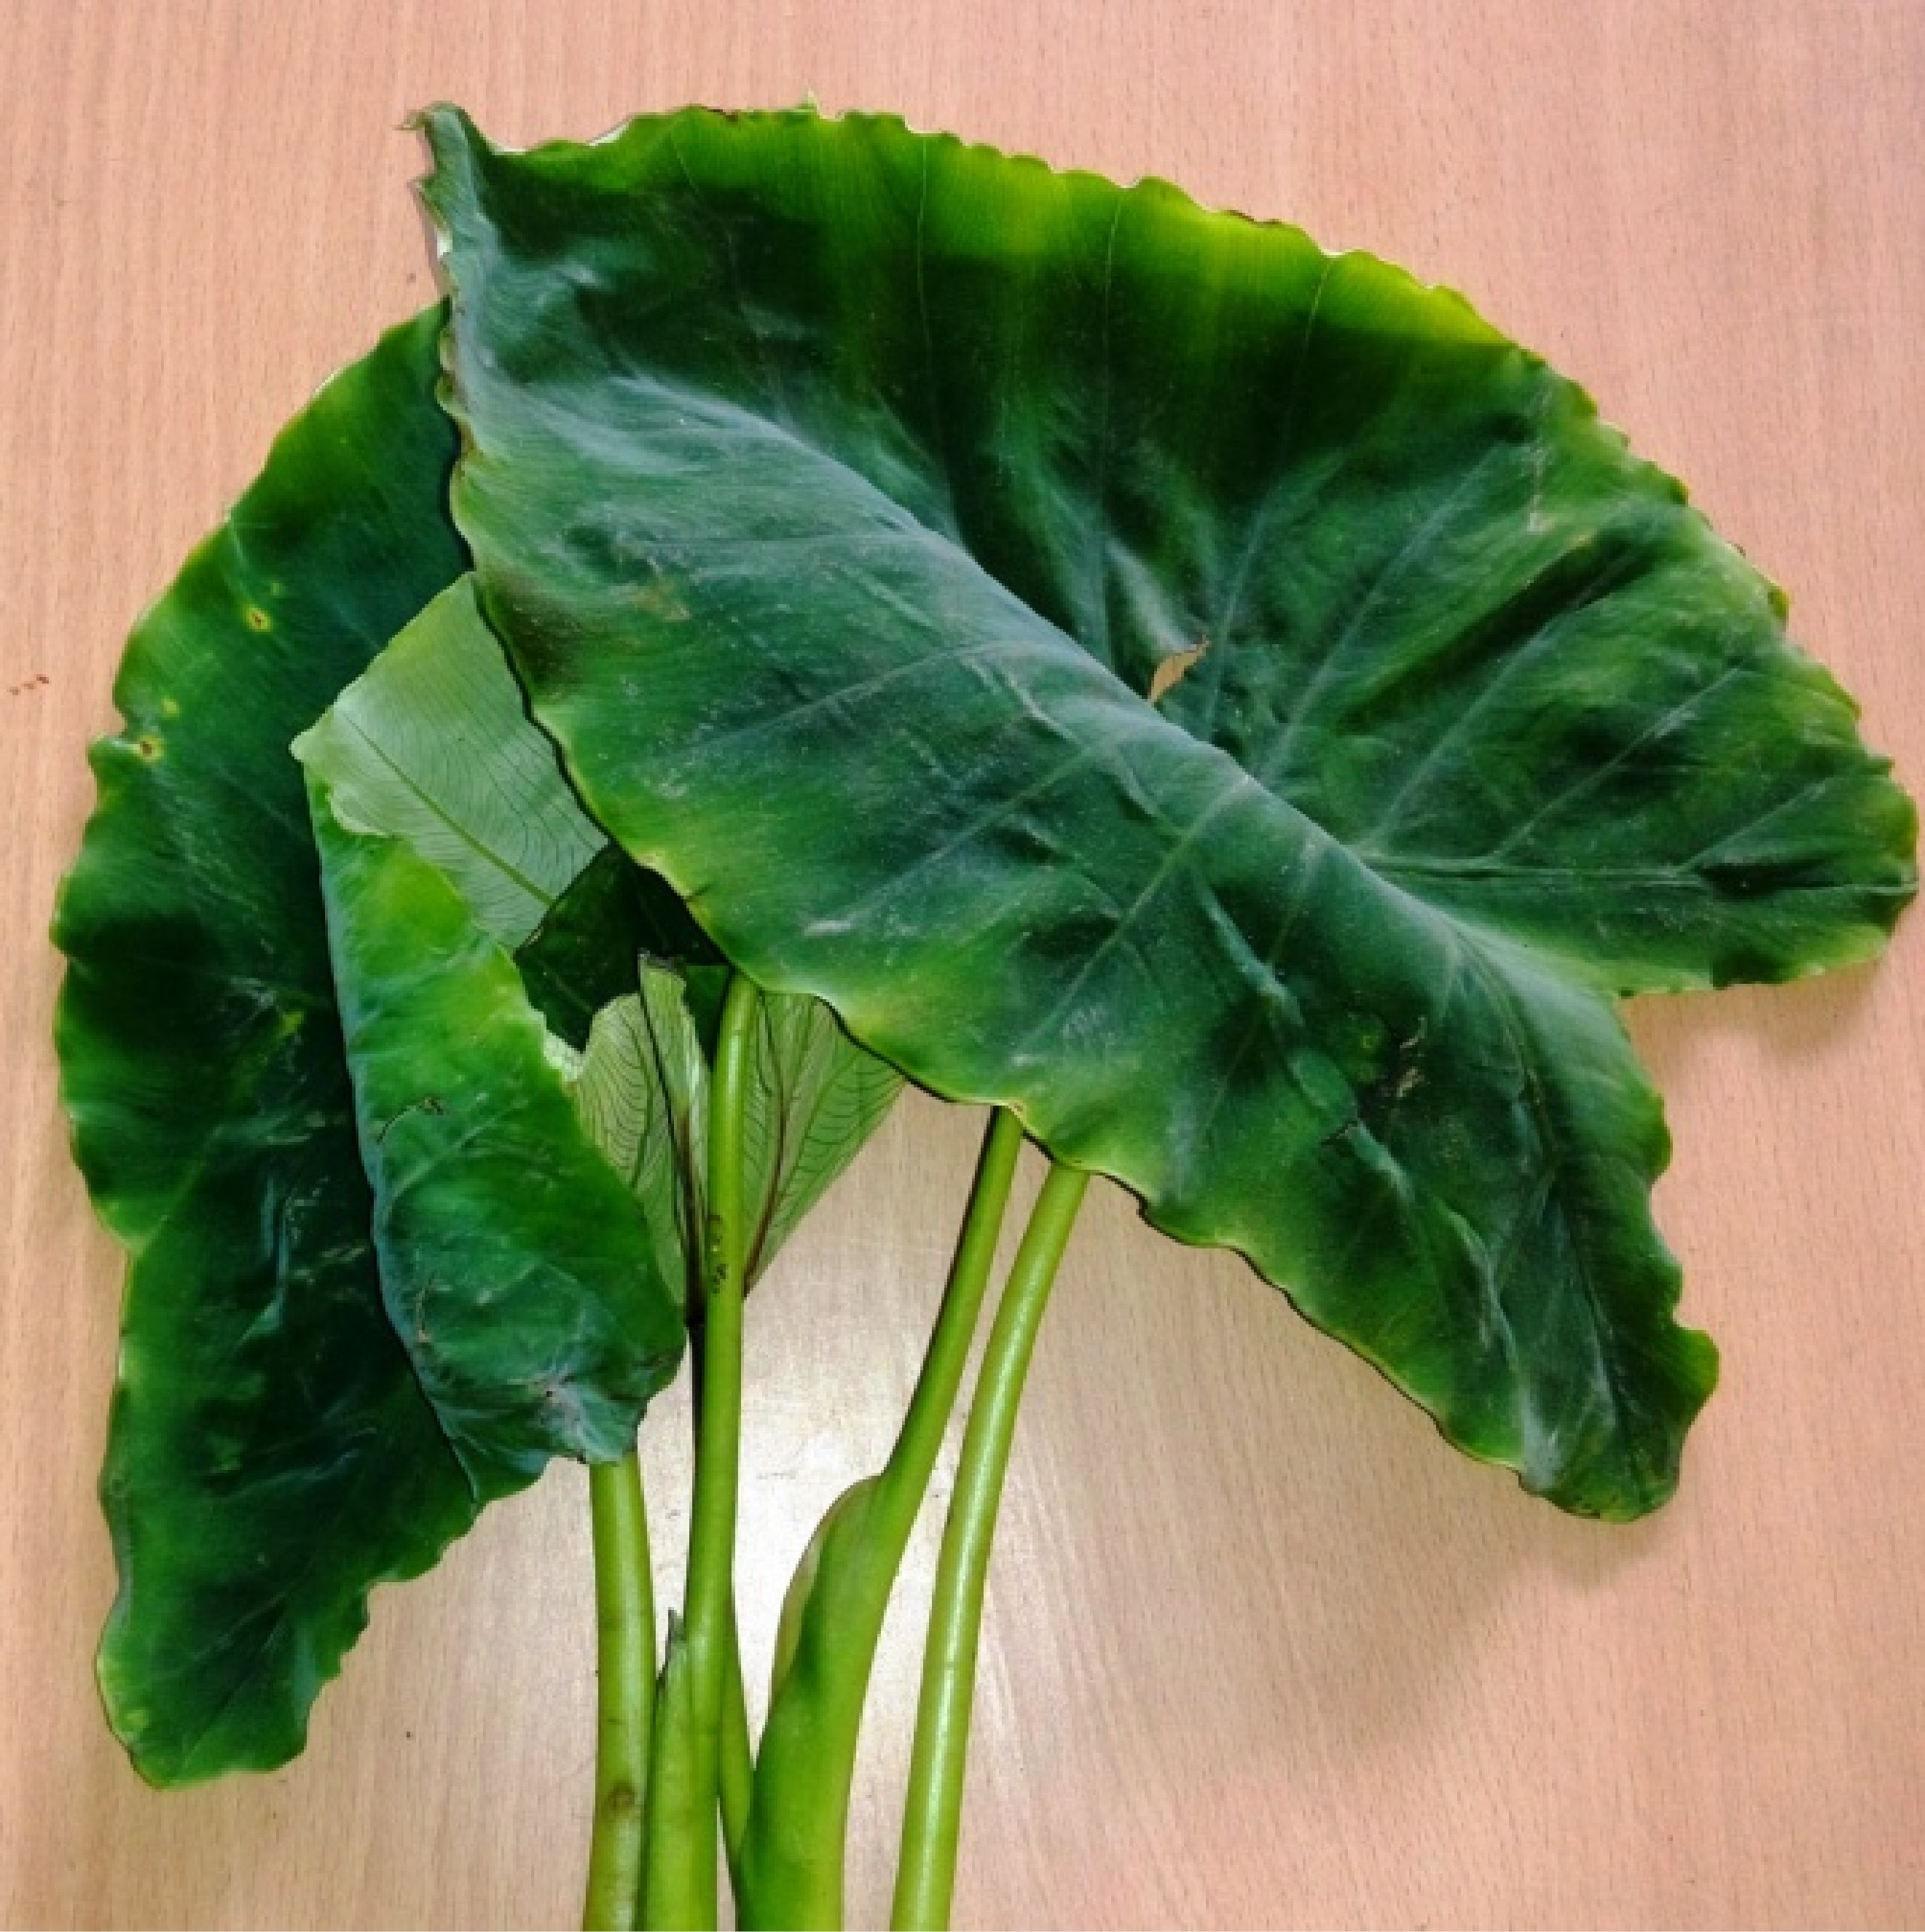 Indigenous Food Processed from Colocasia Leaves - The Morung Express